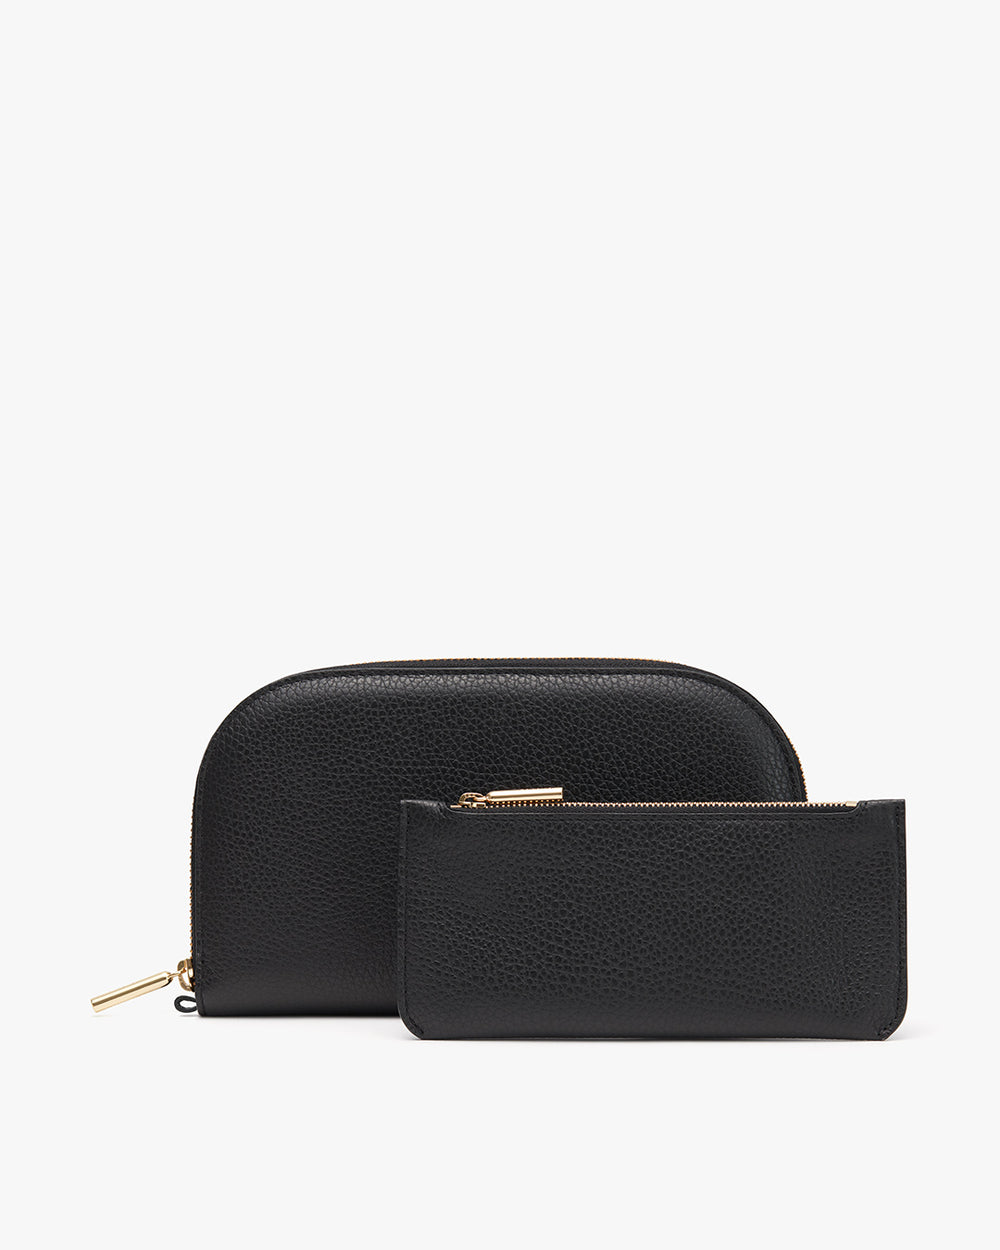 Gusseted Leather Coin Purse with Zipper - Black